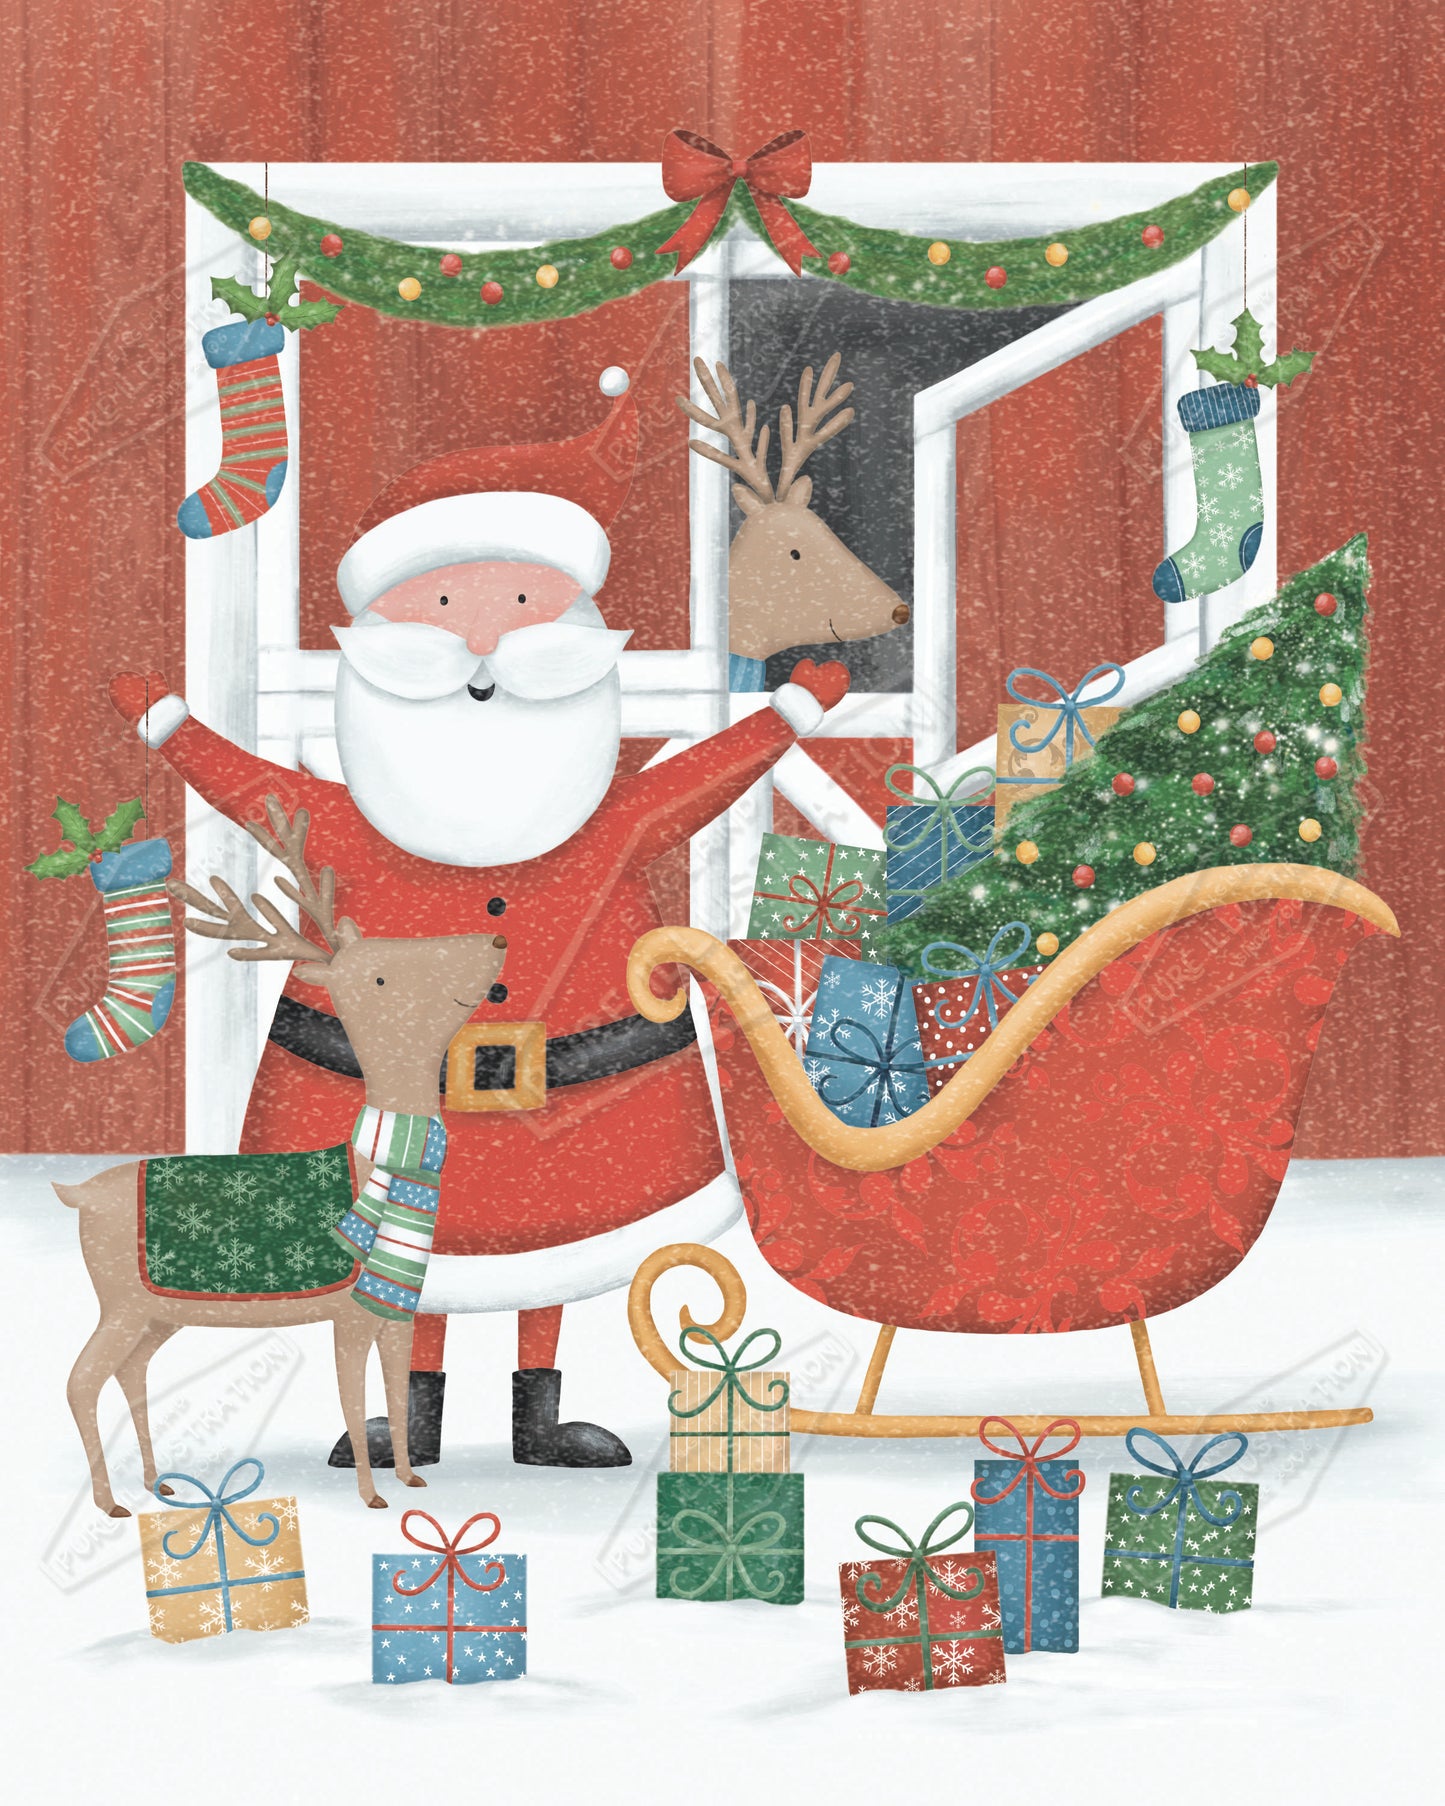 00035458AAI - Anna Aitken is represented by Pure Art Licensing Agency - Christmas Greeting Card Design